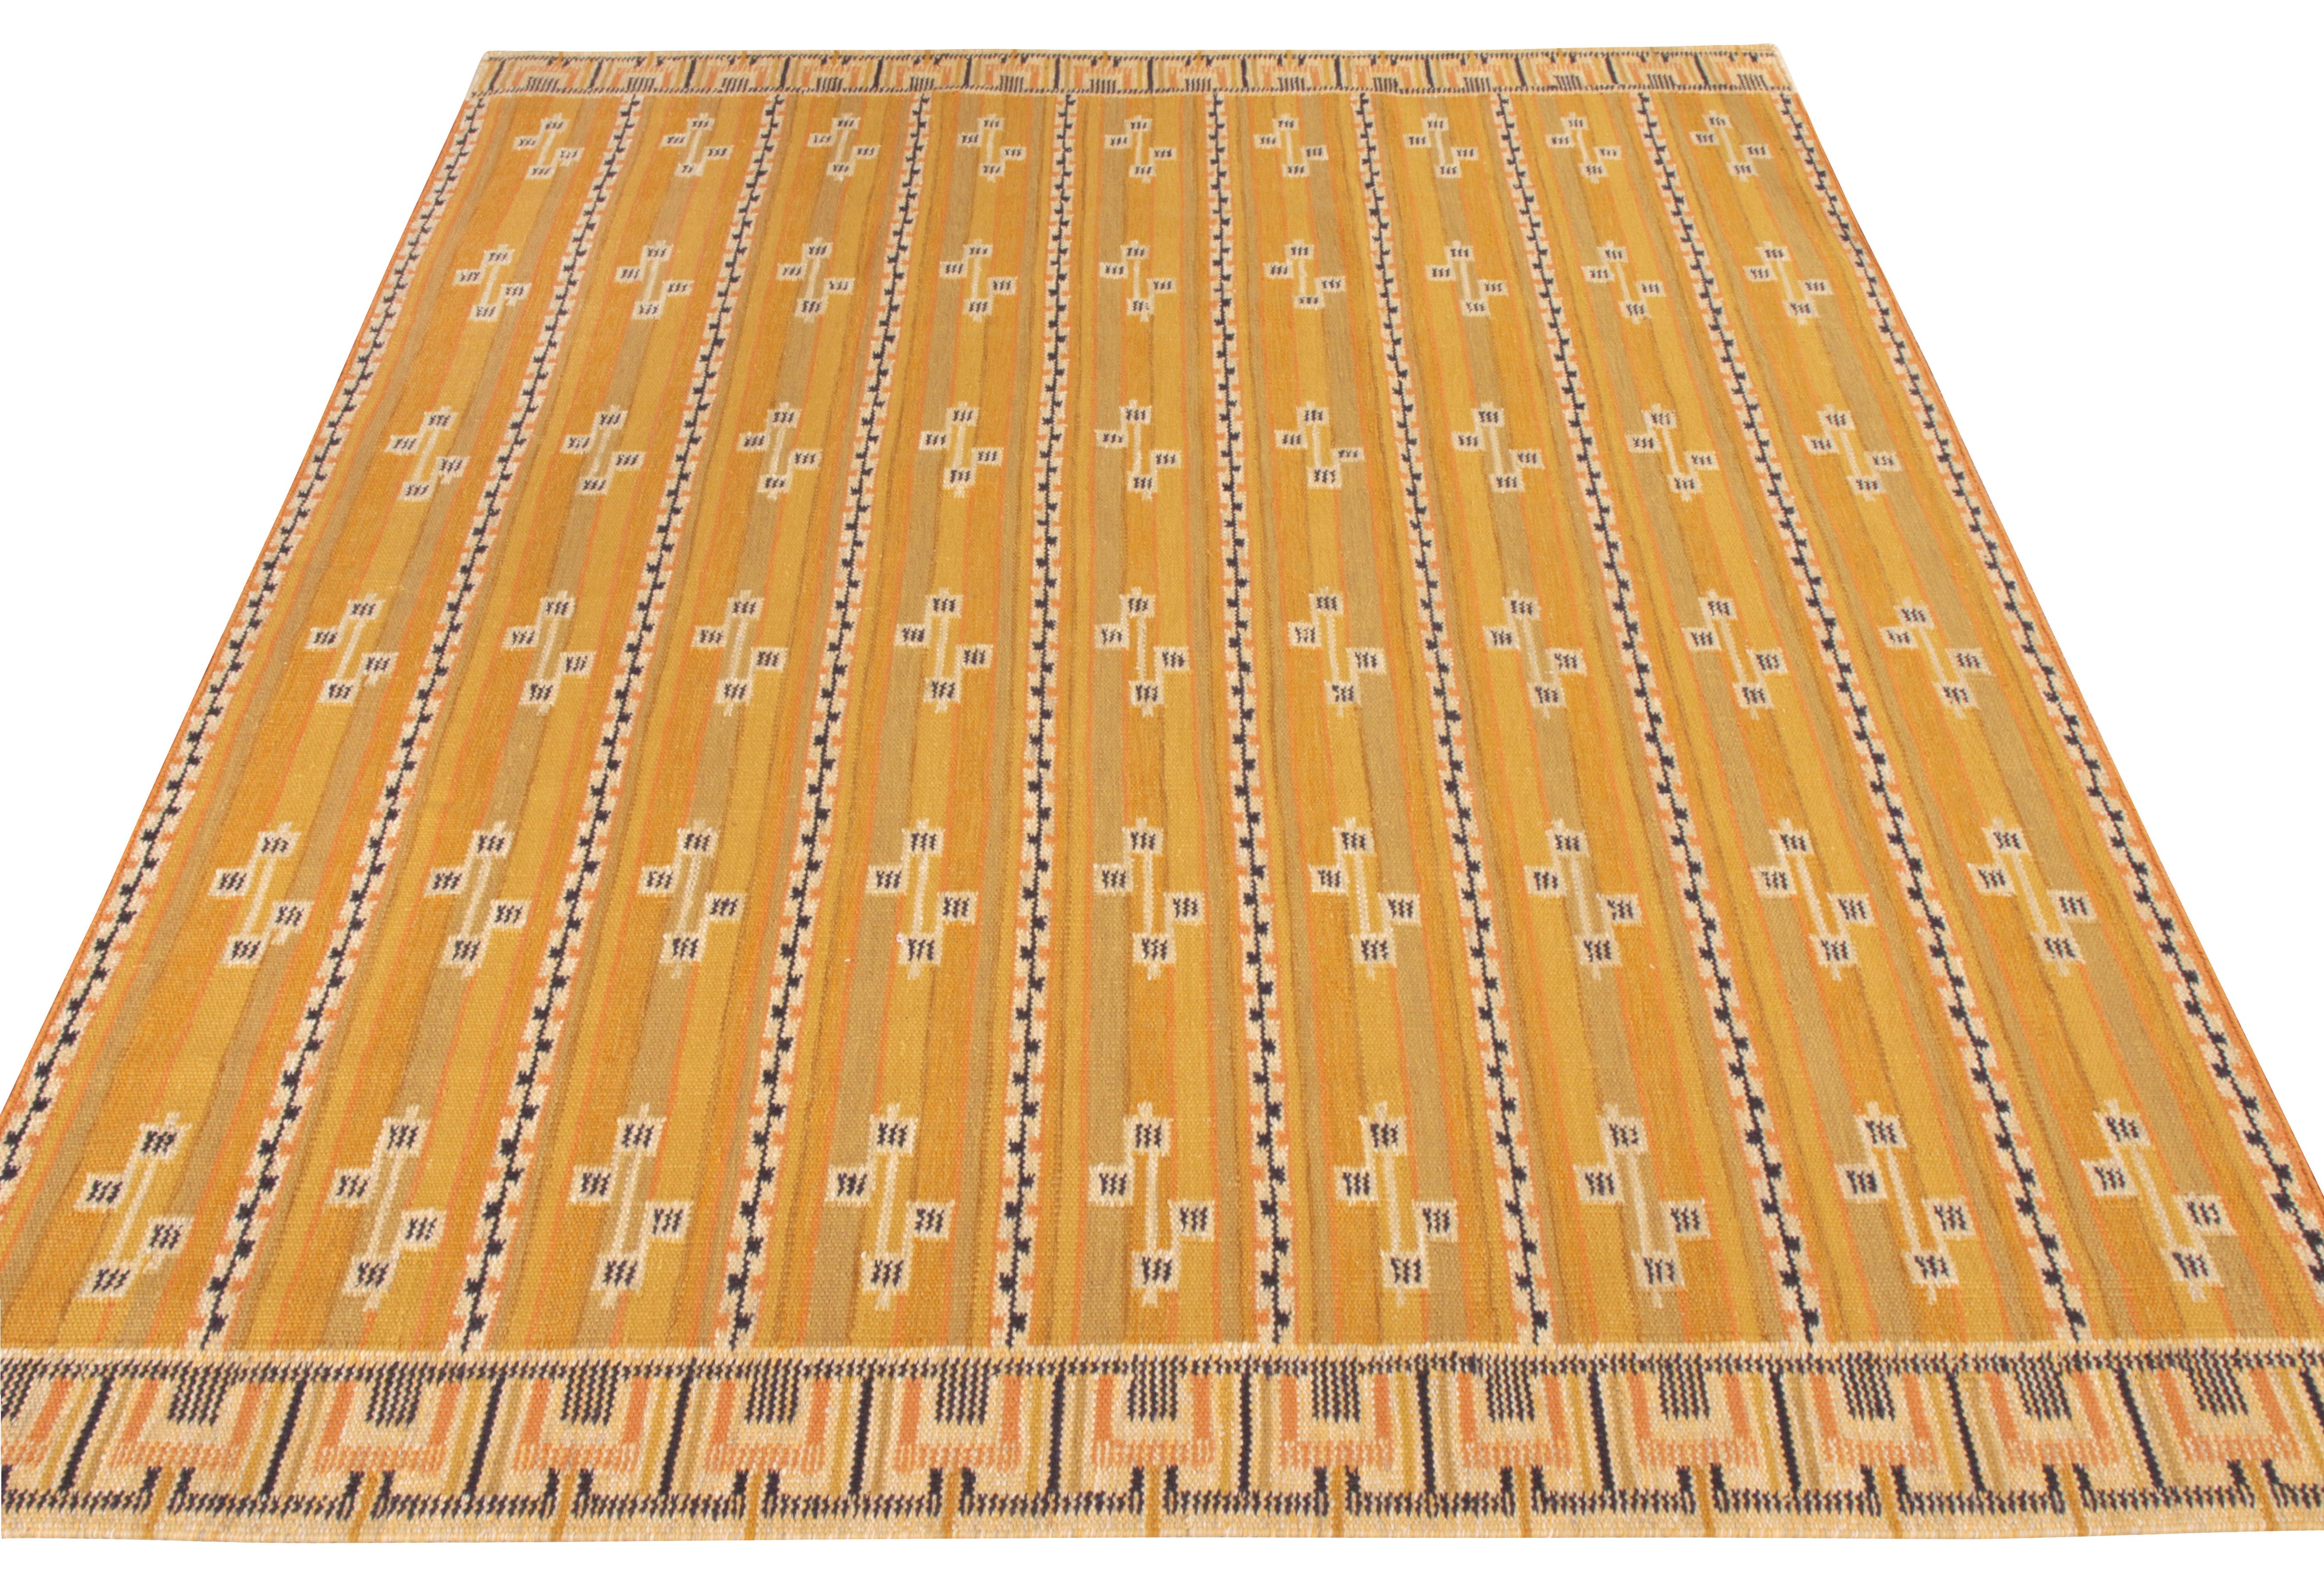 This 9 x 12 Scandinavian Kilim rug representing the latest edition of an award-winning design from Rug & Kilim’s titular collection. A sophisticated rendition that features a stripe design alternated by symmetrical vertical patterns enjoys a